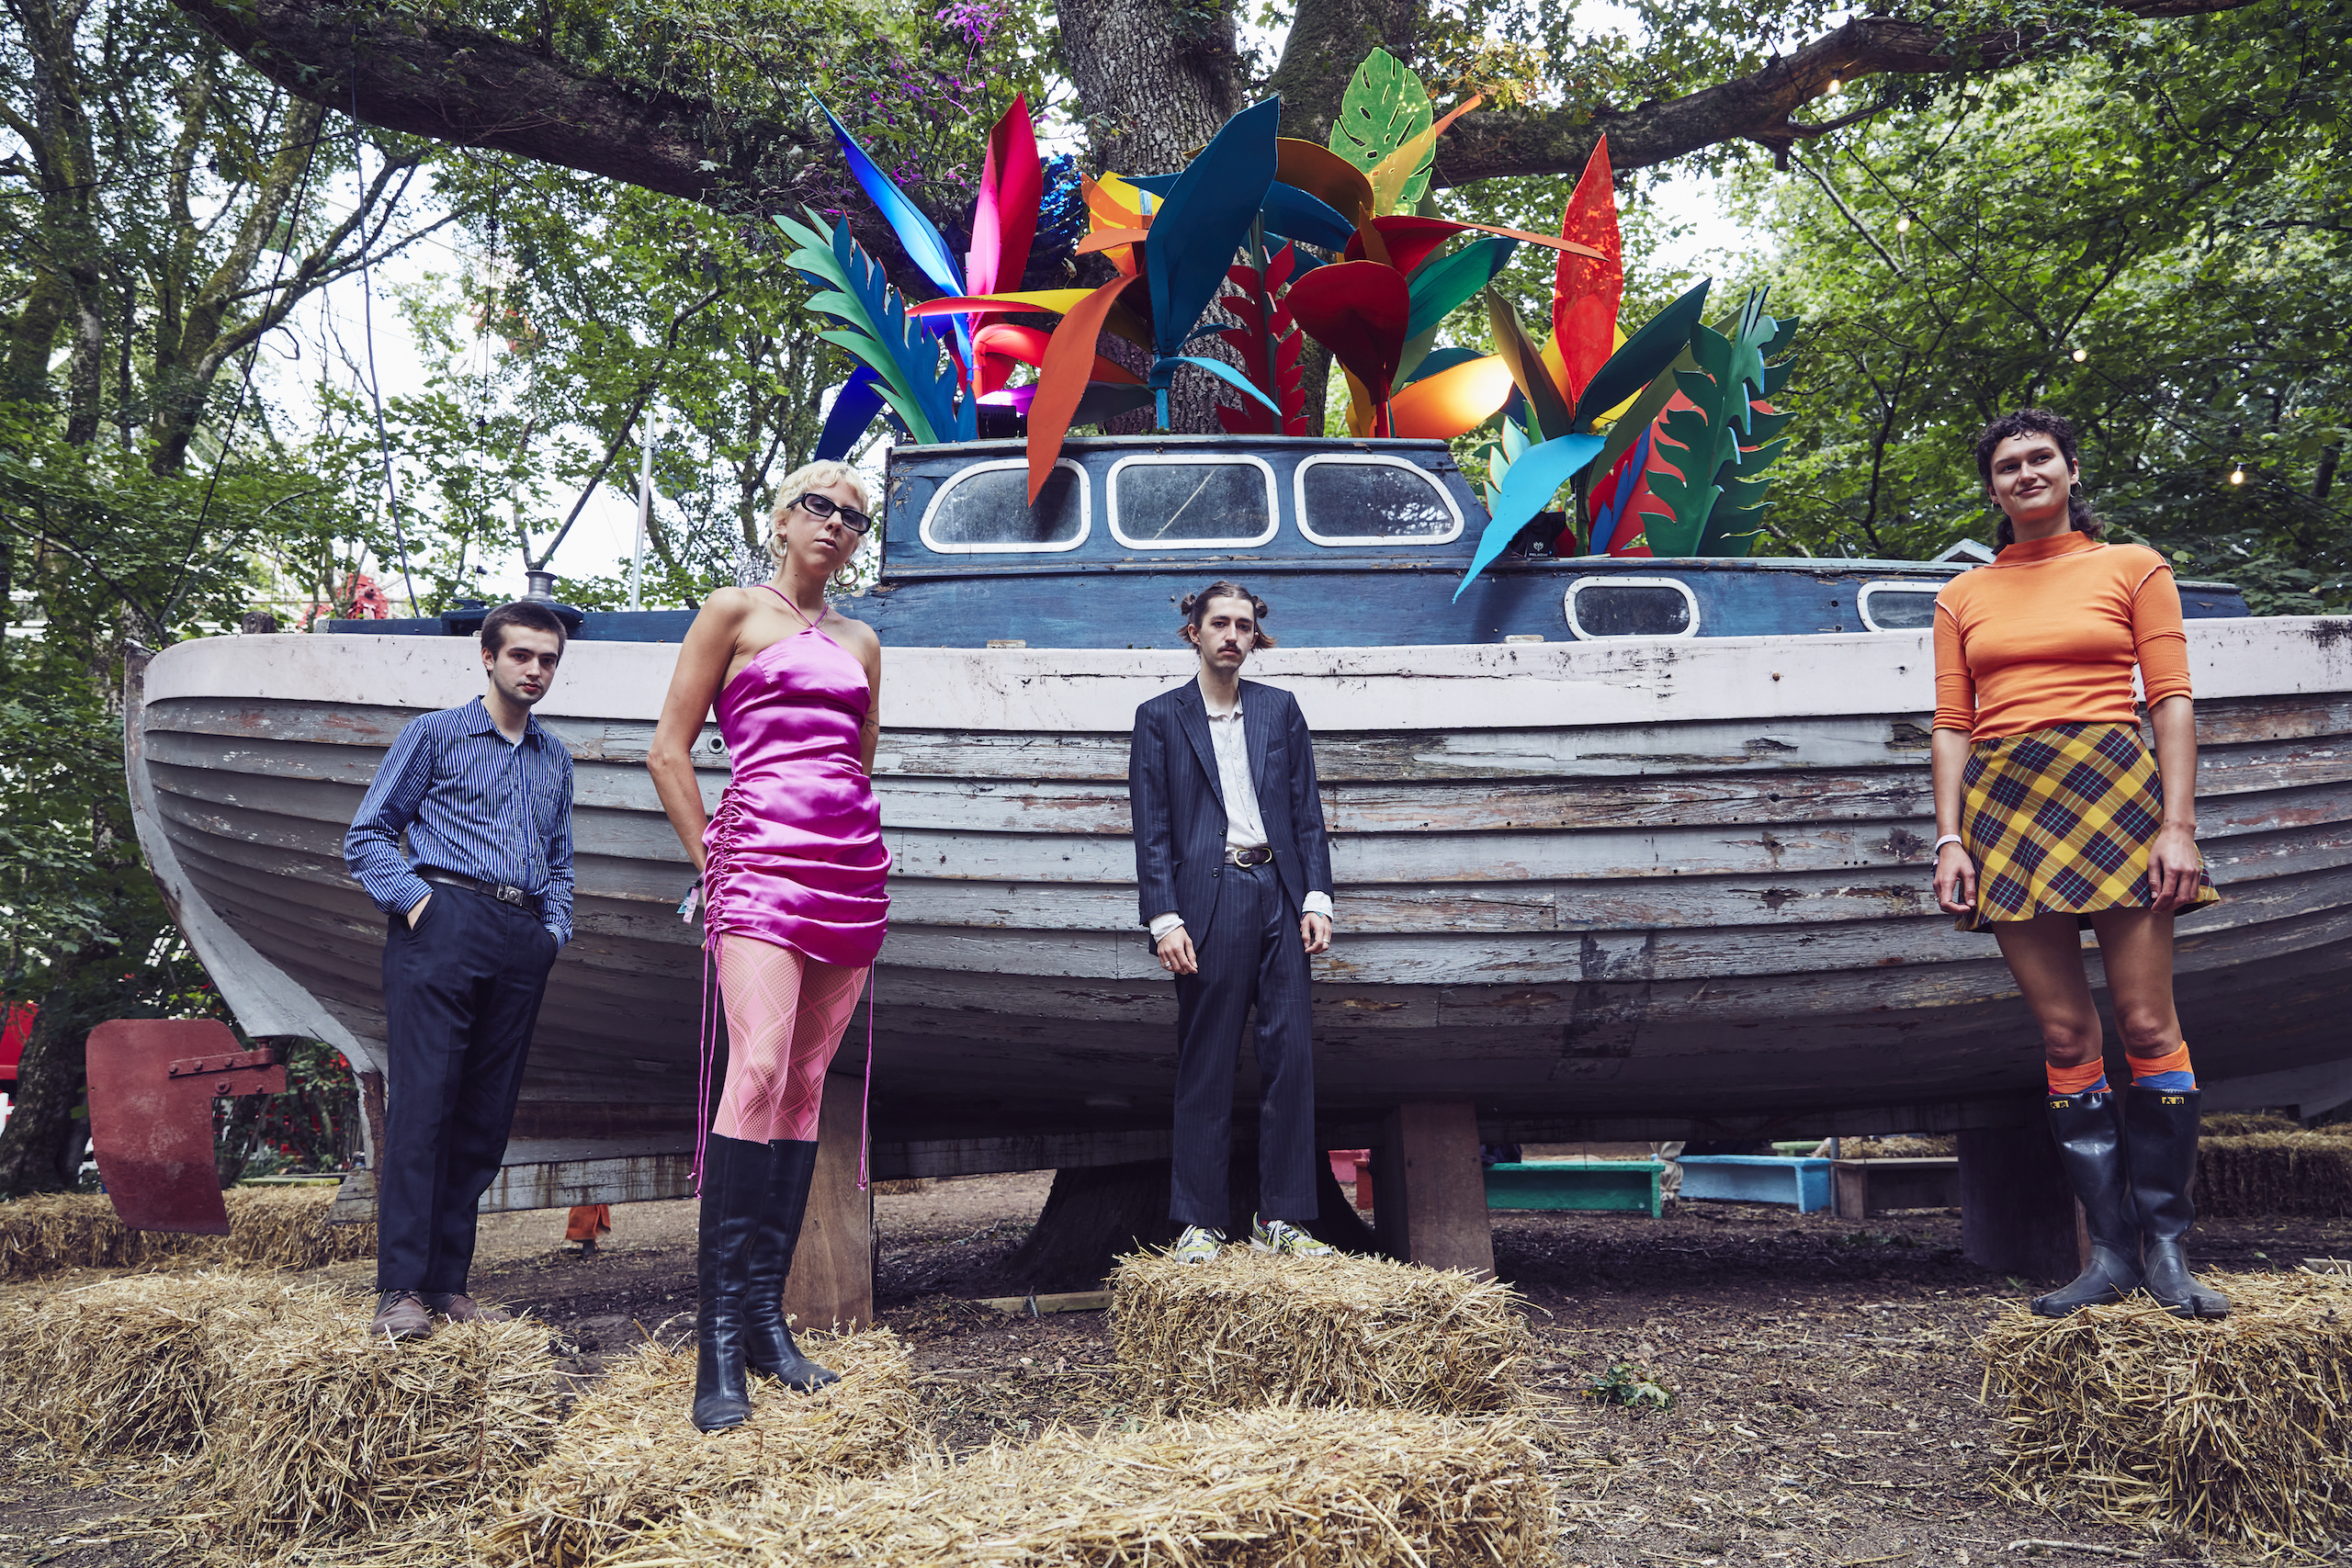 The Umlauts stood in front of Disco Ship at EOTR